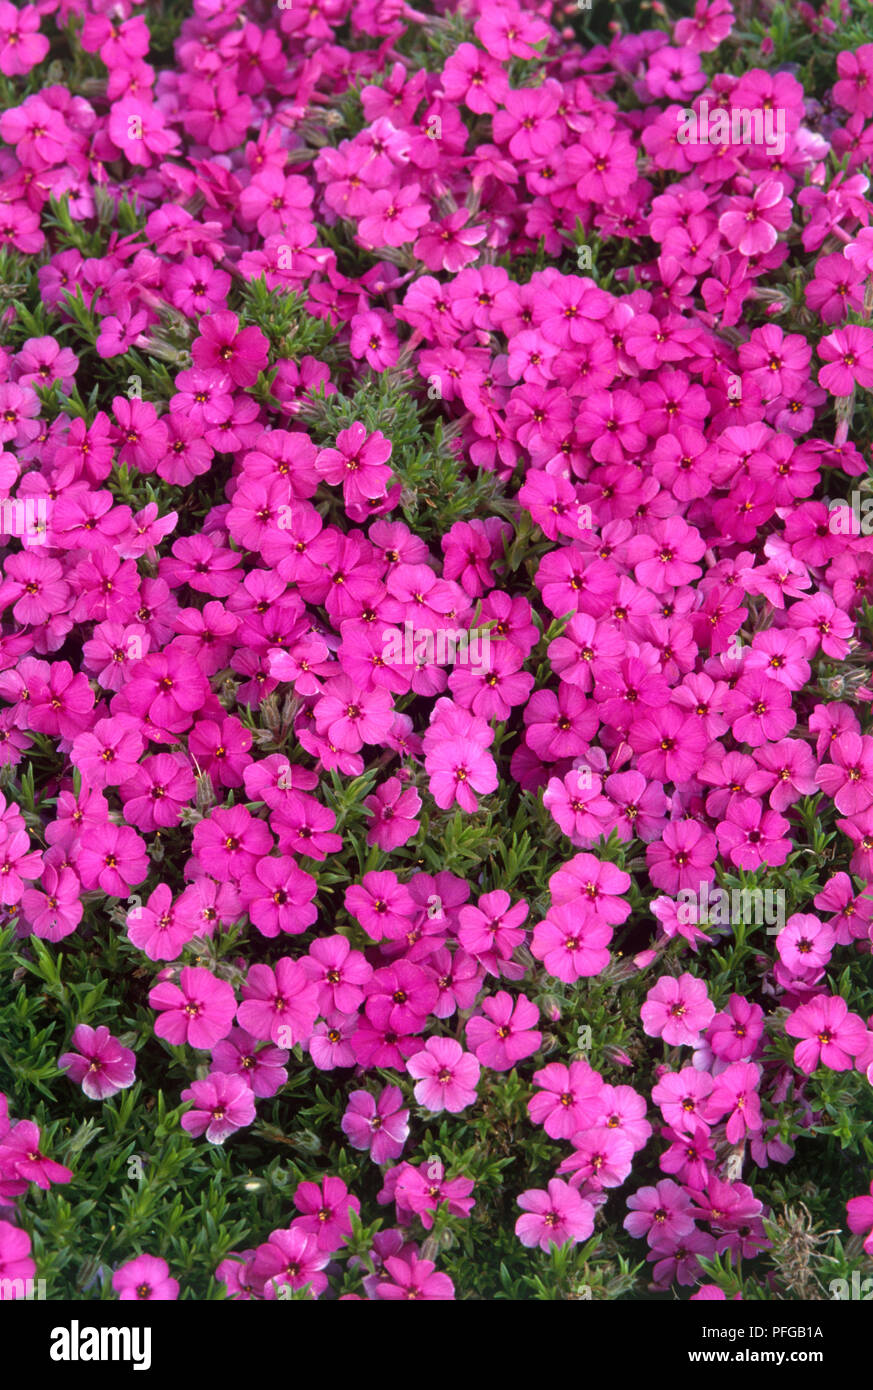 Phlox douglasii 'Red Admiral' (Phlox), profusion of pink flowers Stock Photo